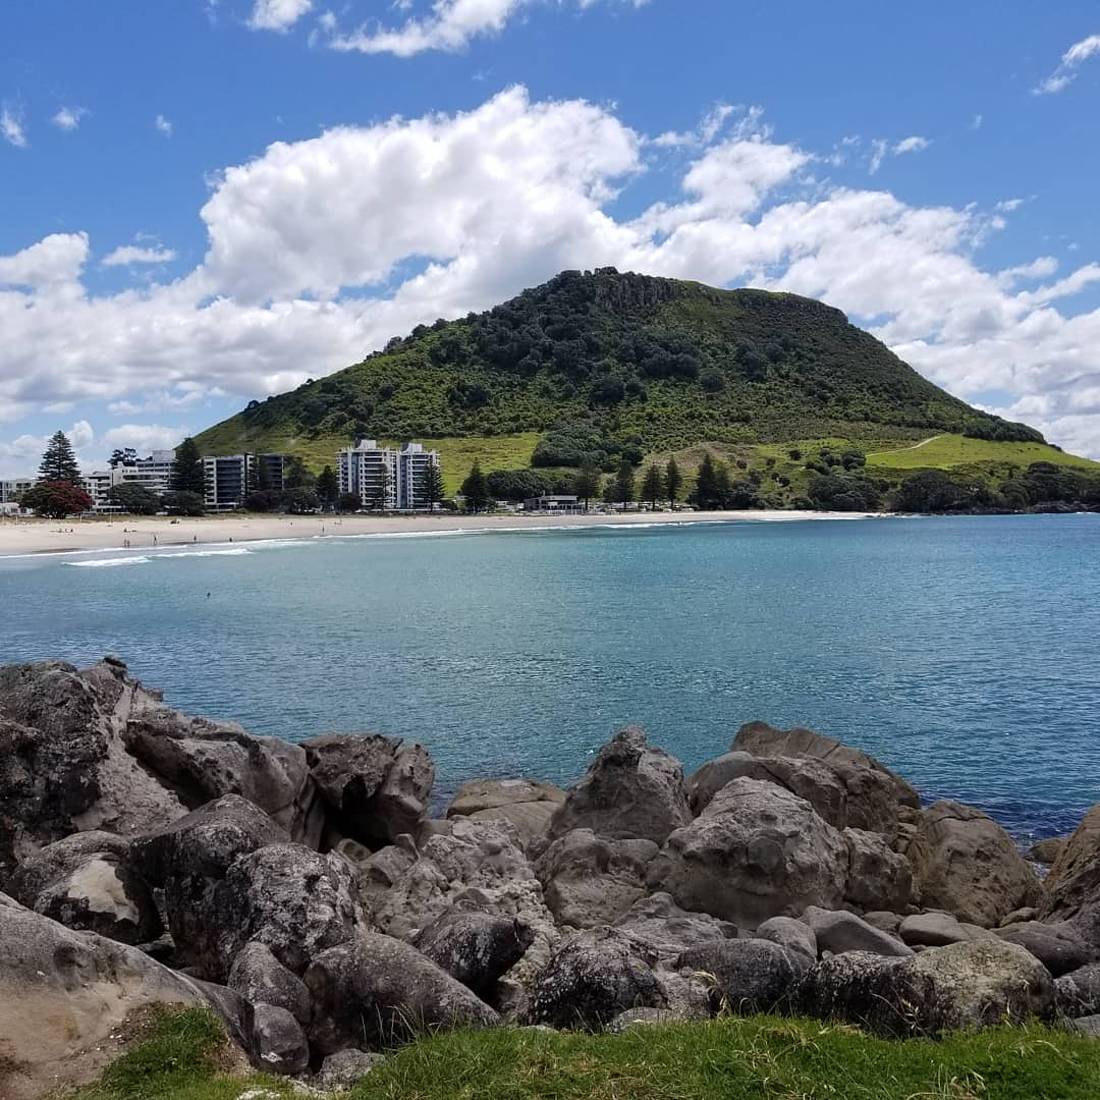 Swimming at the beach is one of the best things to do in Mount Maunganui